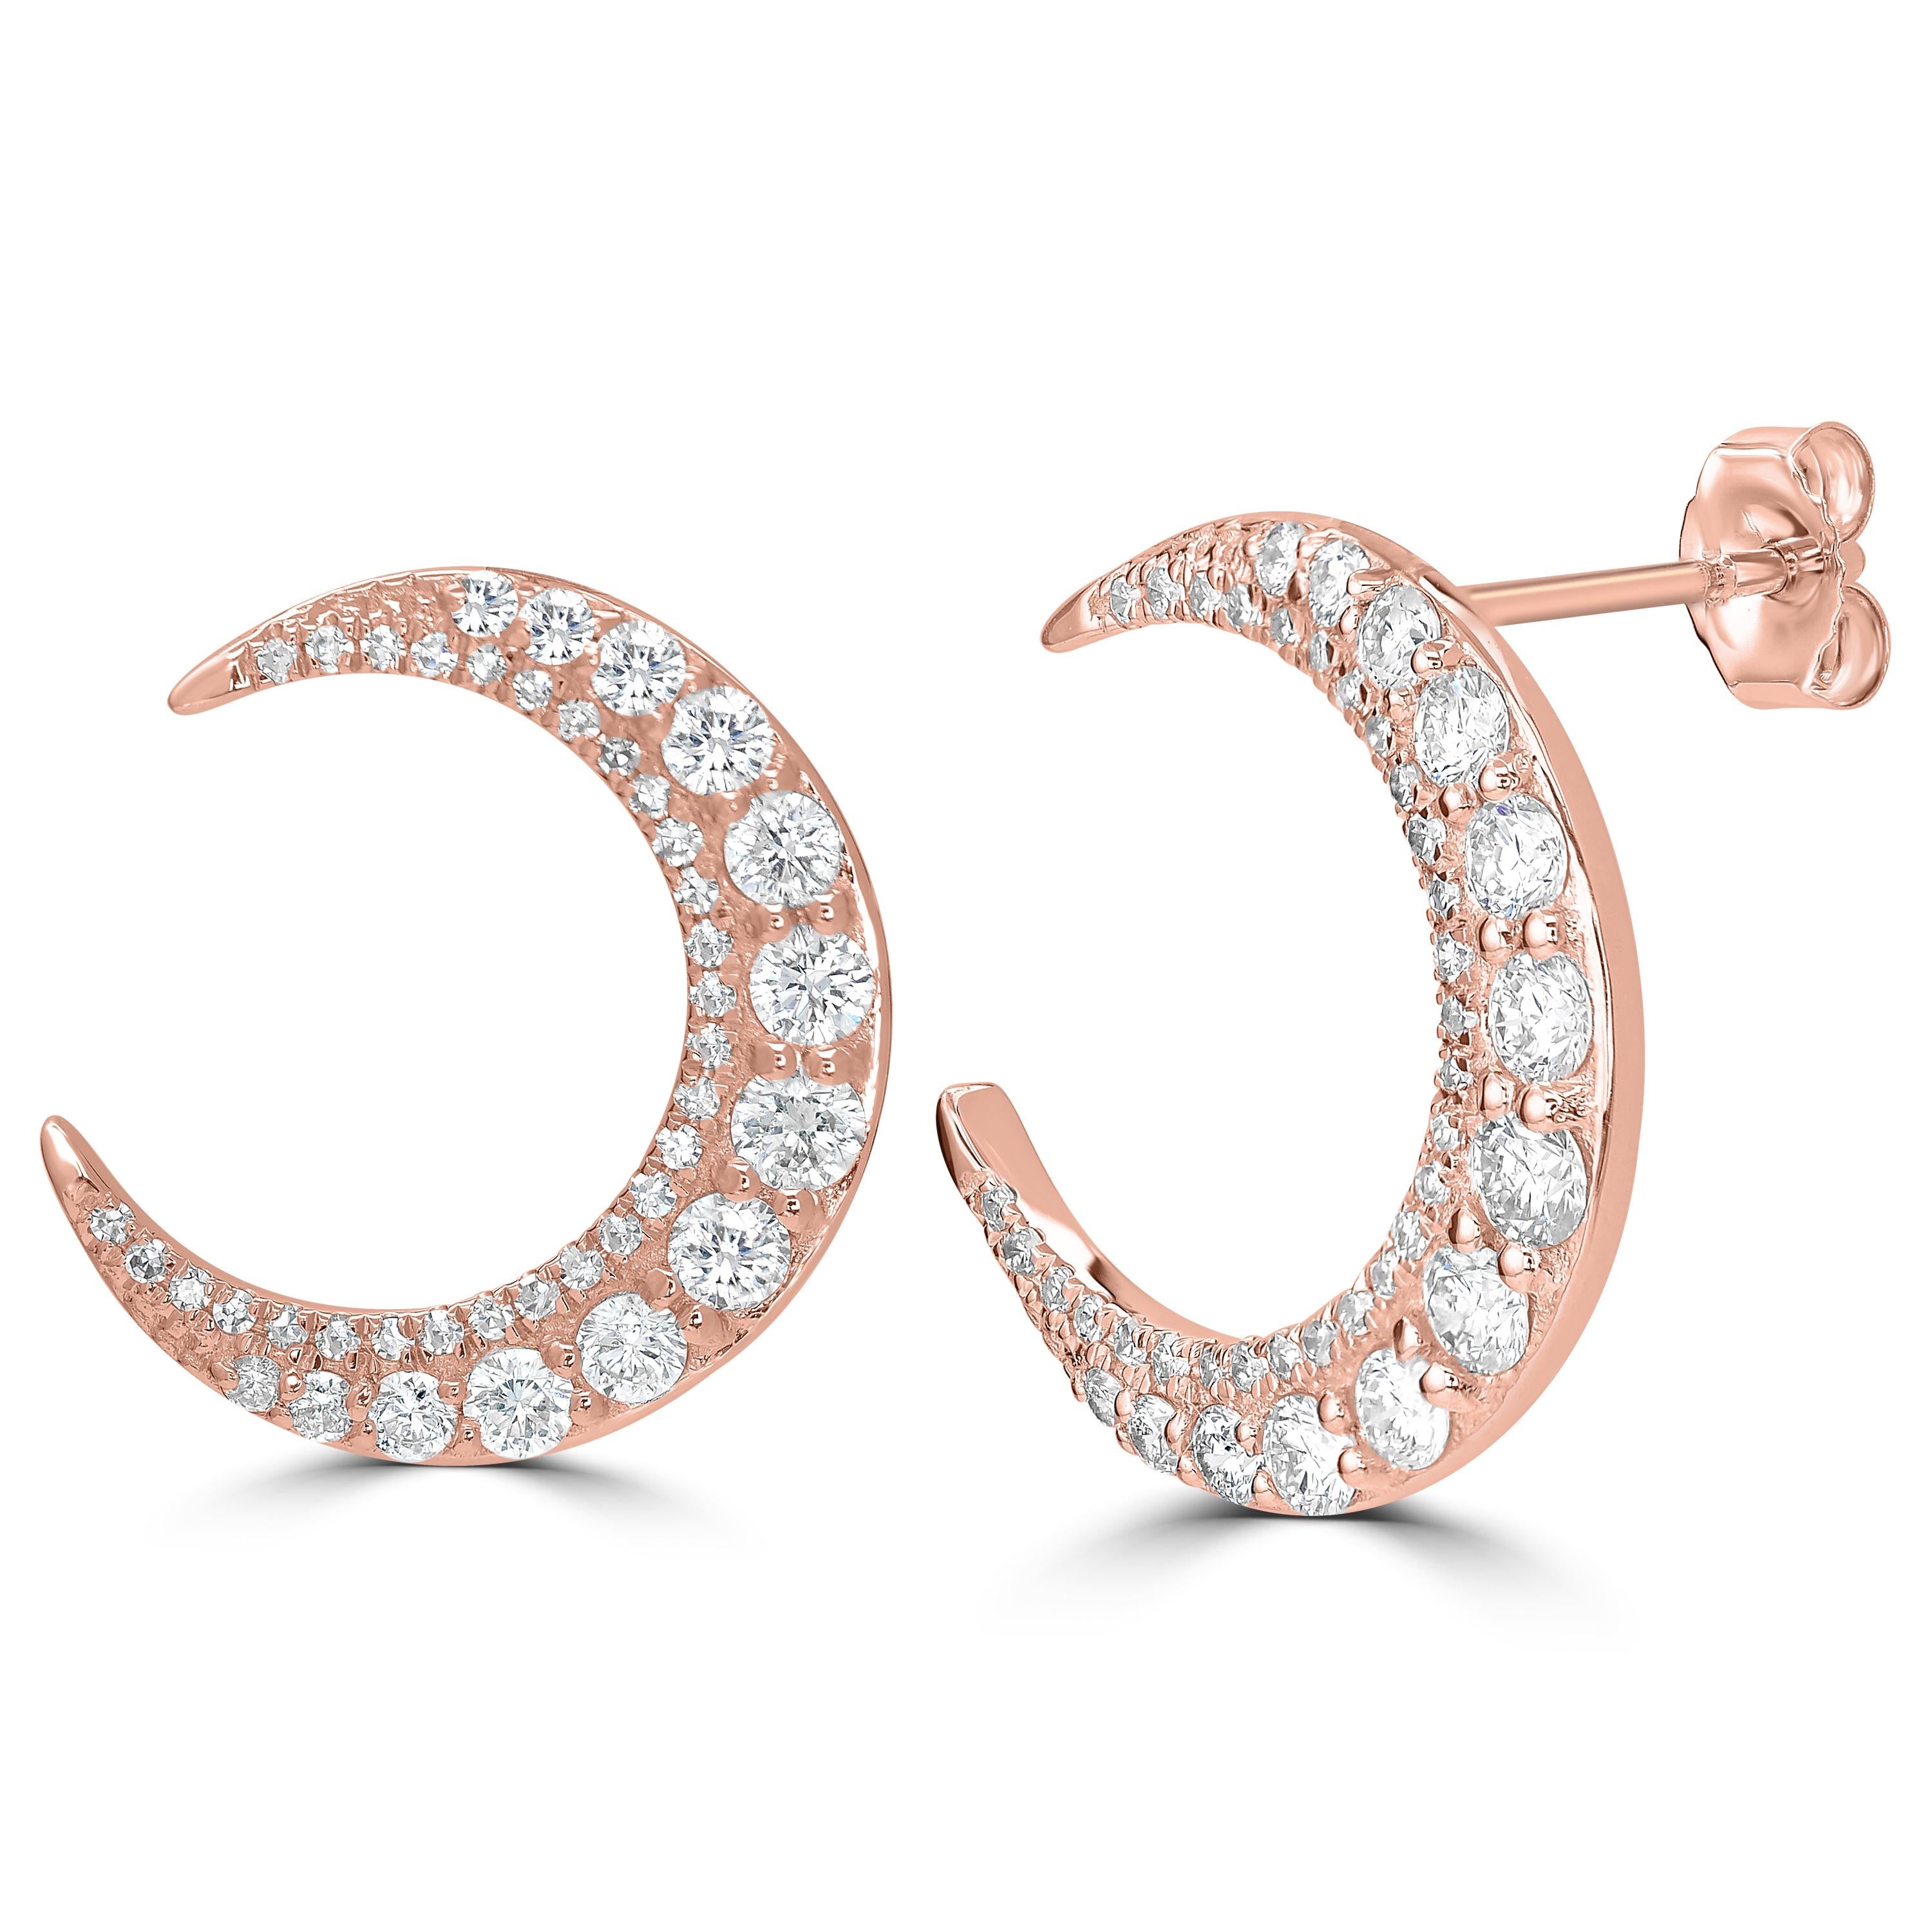 Luxle 18k Rose Gold Round Diamond Crescent Moon Stud Earrings, 0.91 Ct. T.W. These genuine diamond moon earrings will capture cosmic style. A magnificent piece made of 18k gold and set with 84 round full-cut diamonds. The diamonds have a GH color